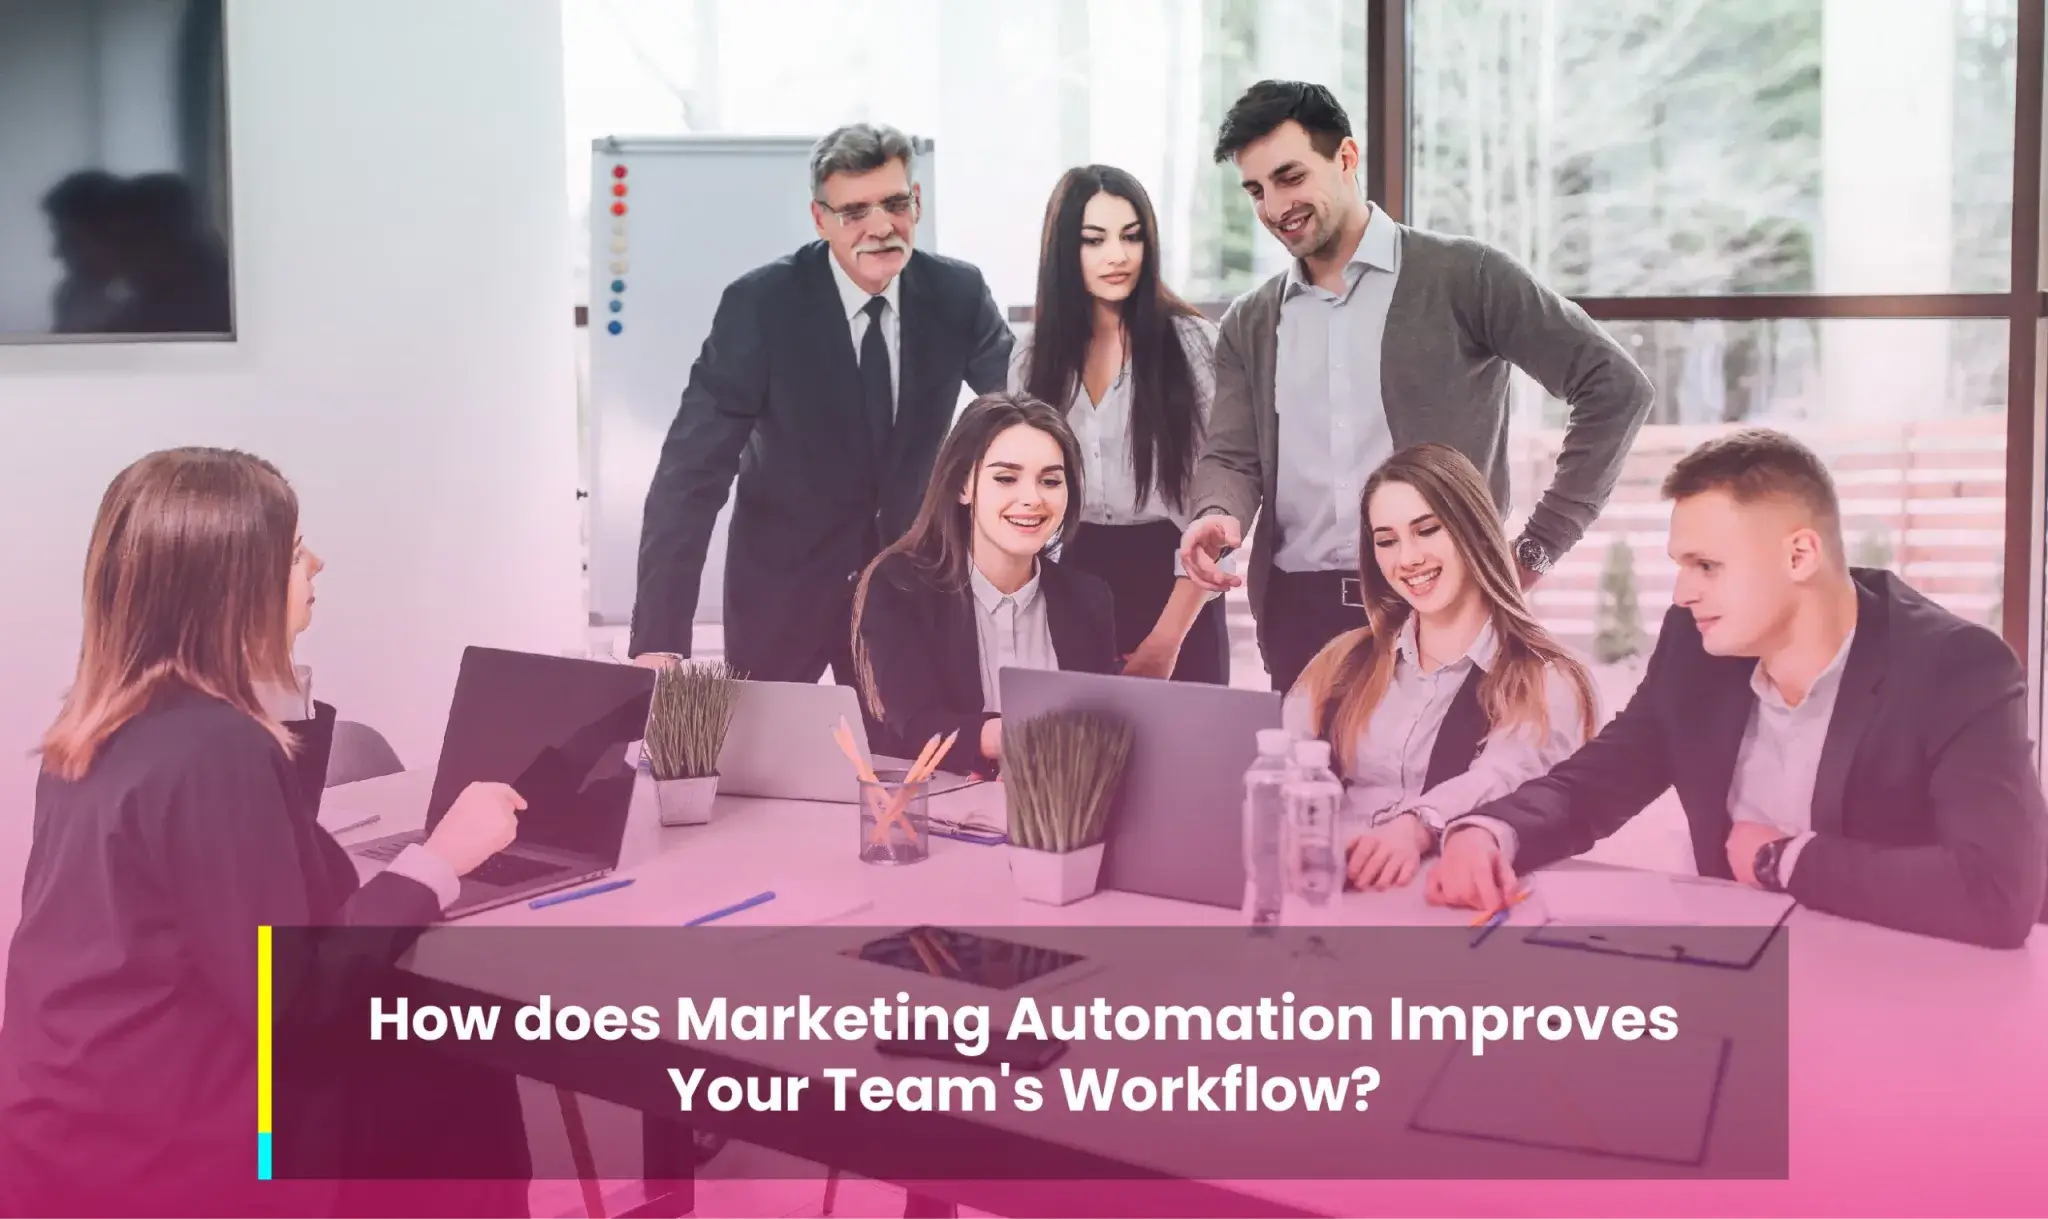 How does Marketing Automation Improve Your Team’s Workflow?